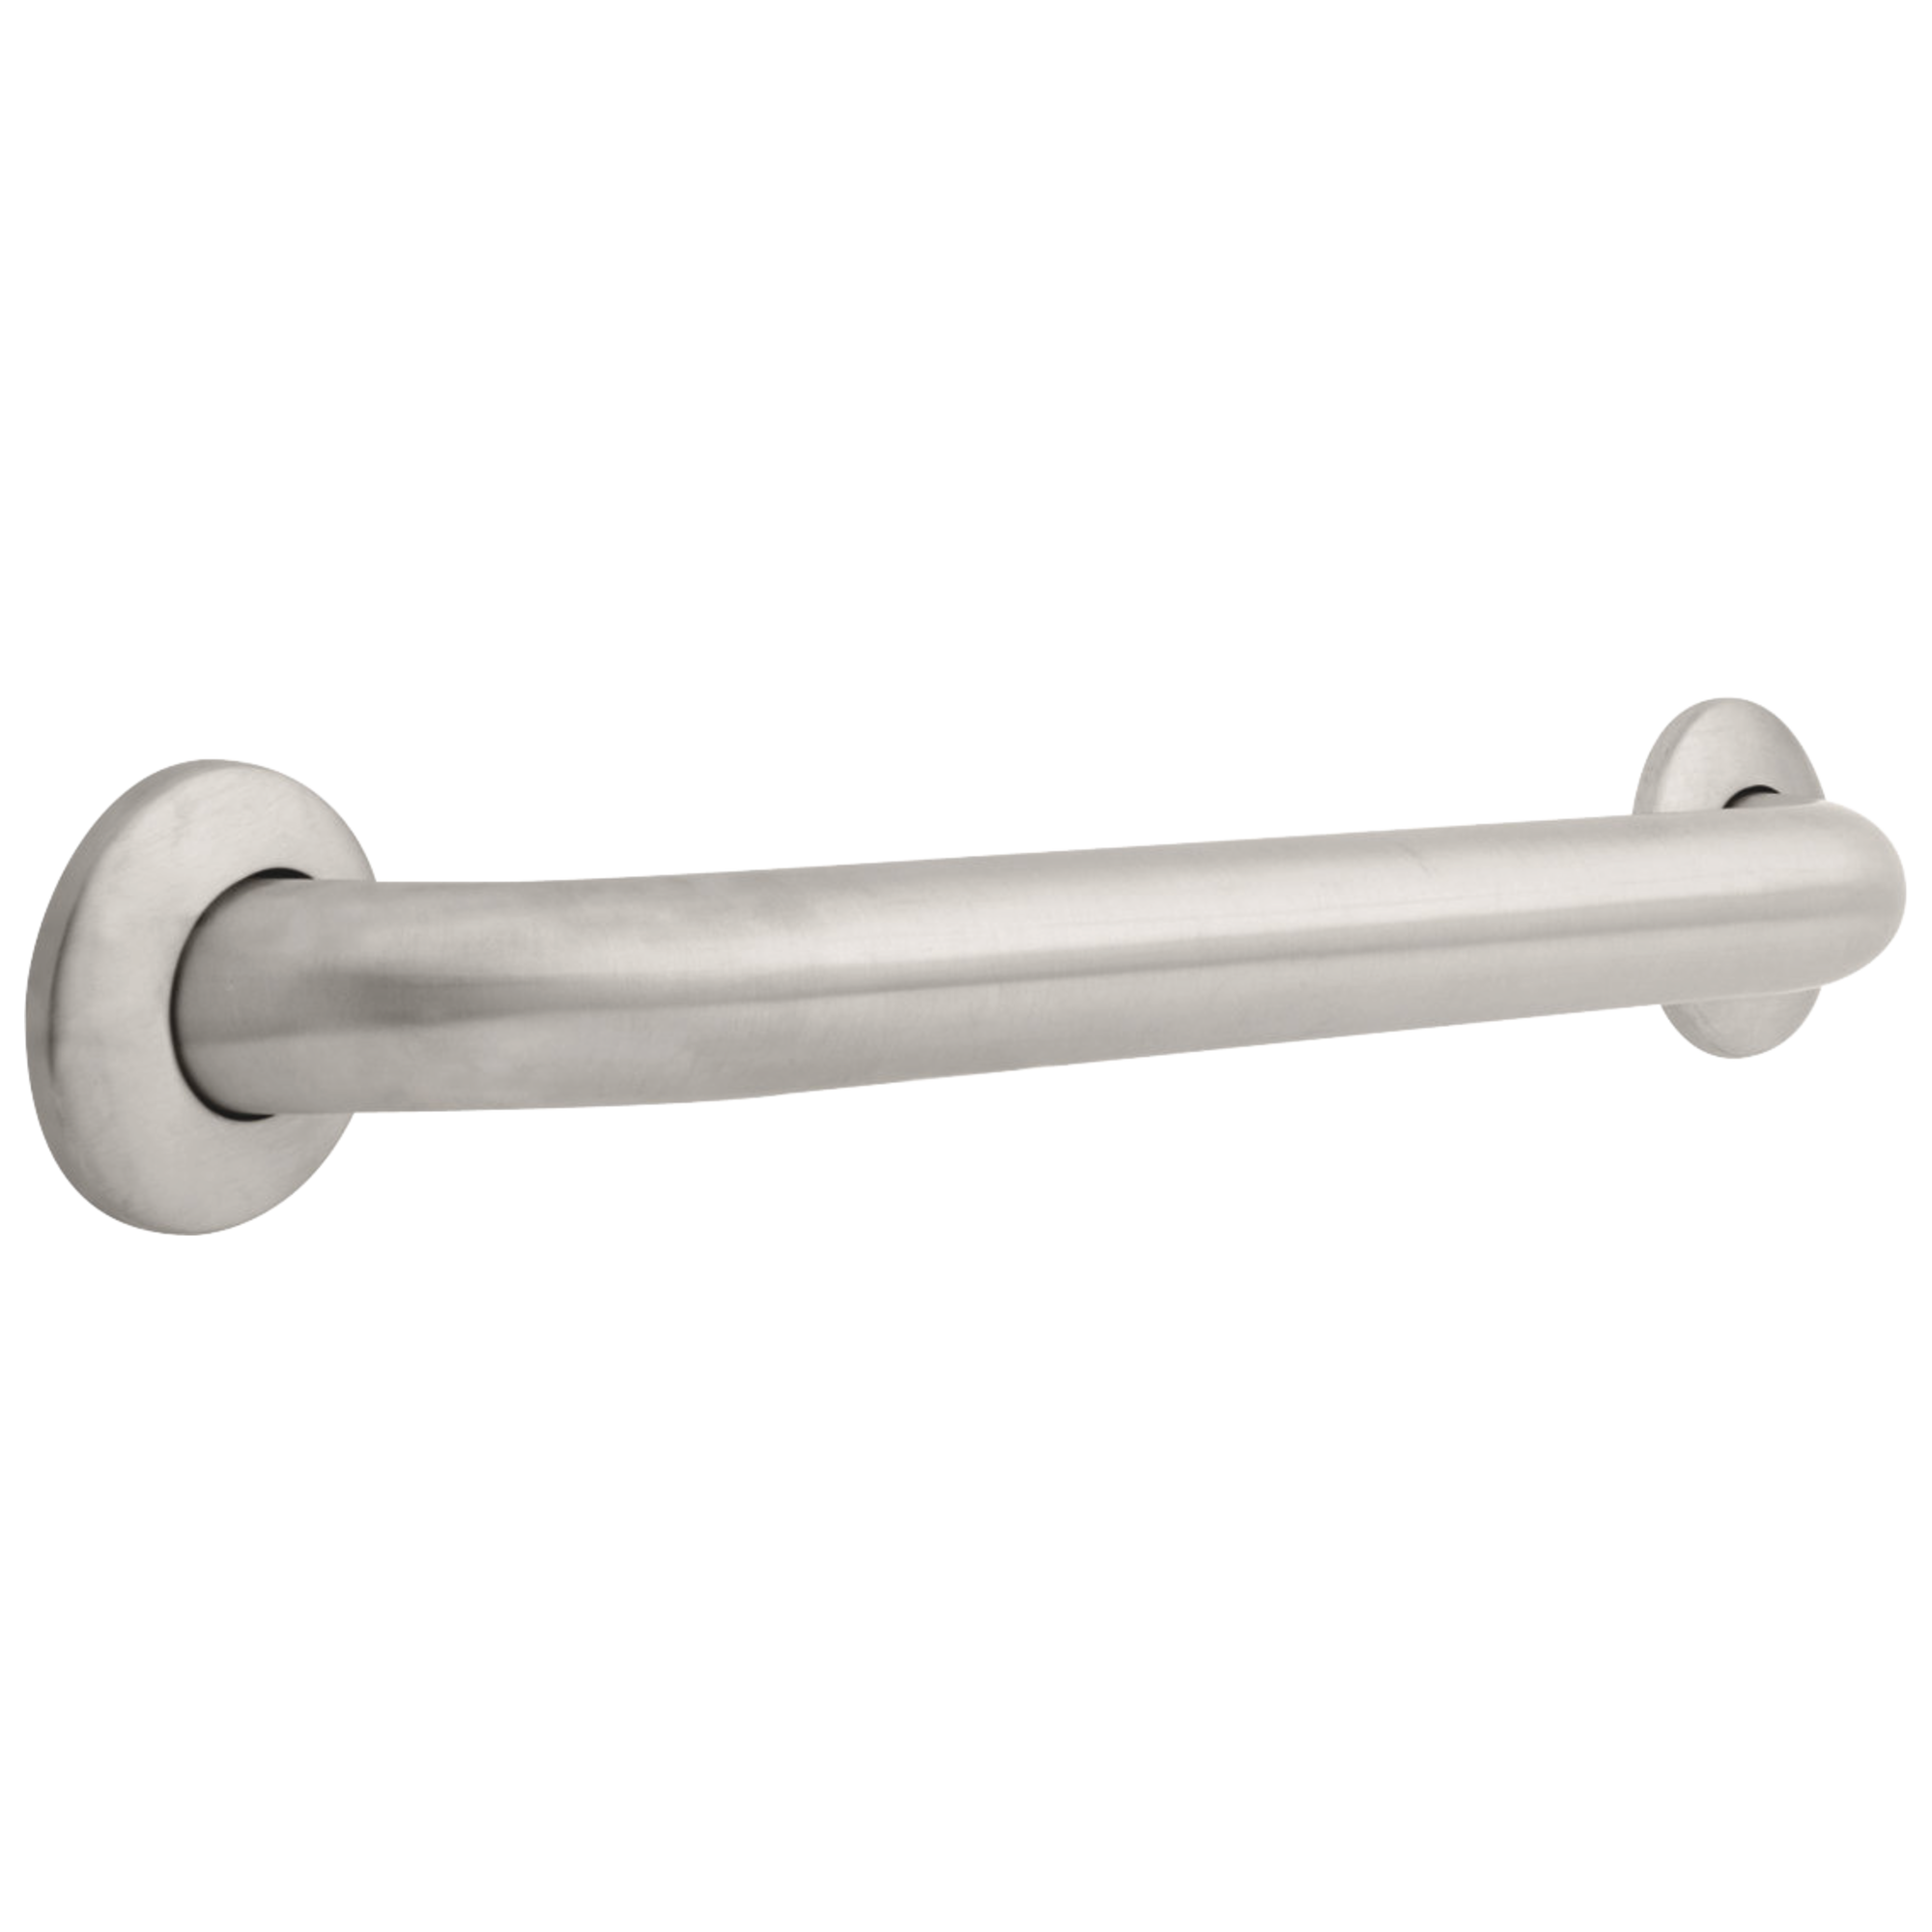 Delta Commercial Other: 1-1/2" x 18" ADA Grab Bar, Concealed Mounting